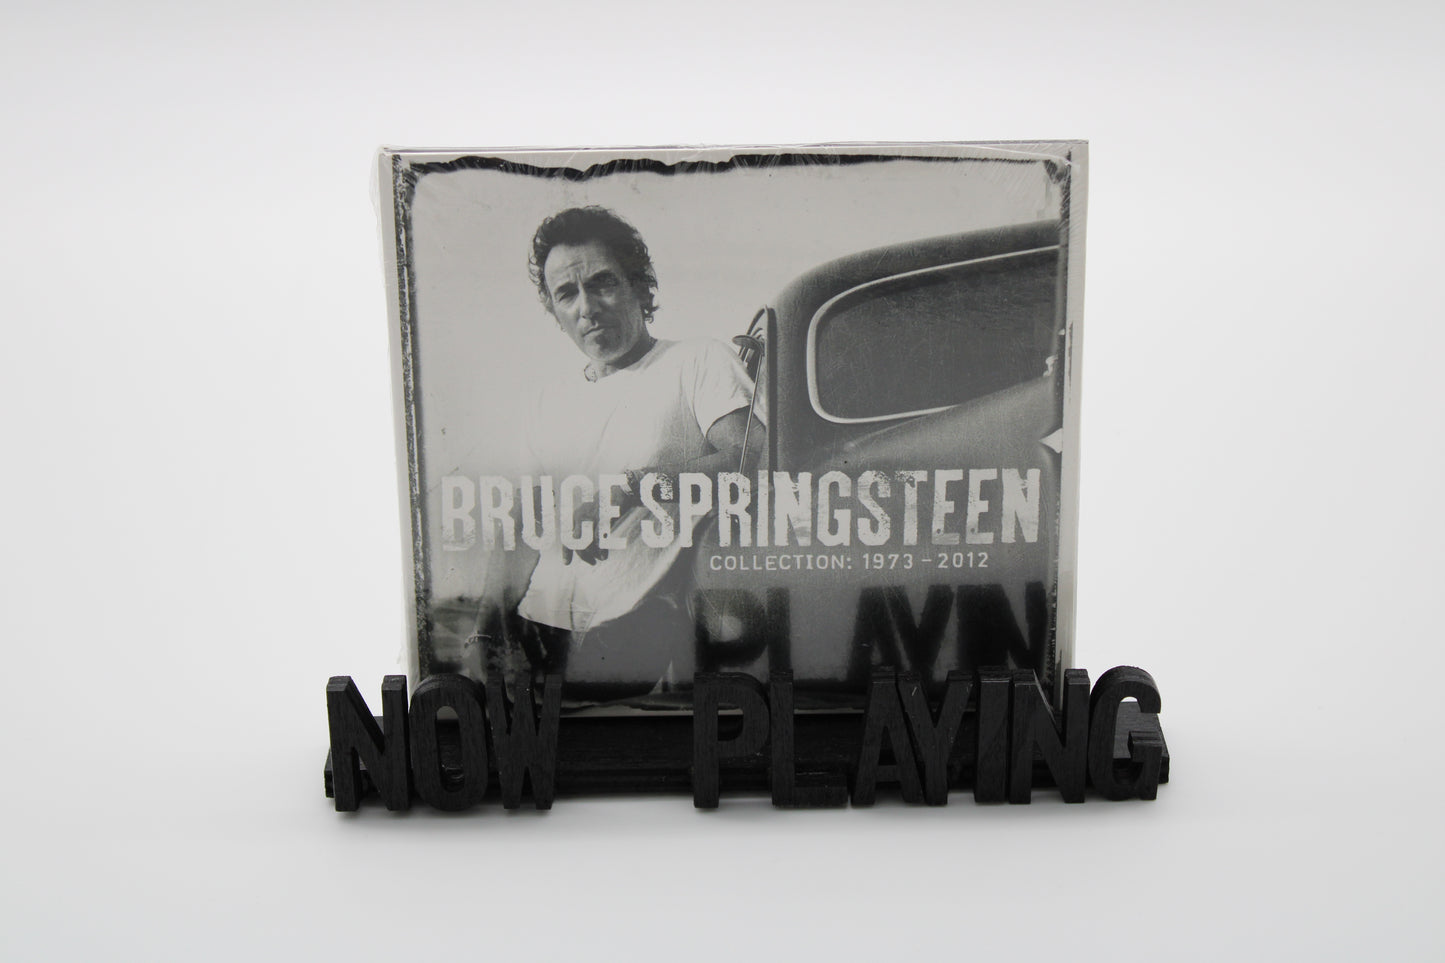 Bruce Springsteen SEALED "Collection 1973-2012" CD/Sealed Unique Release